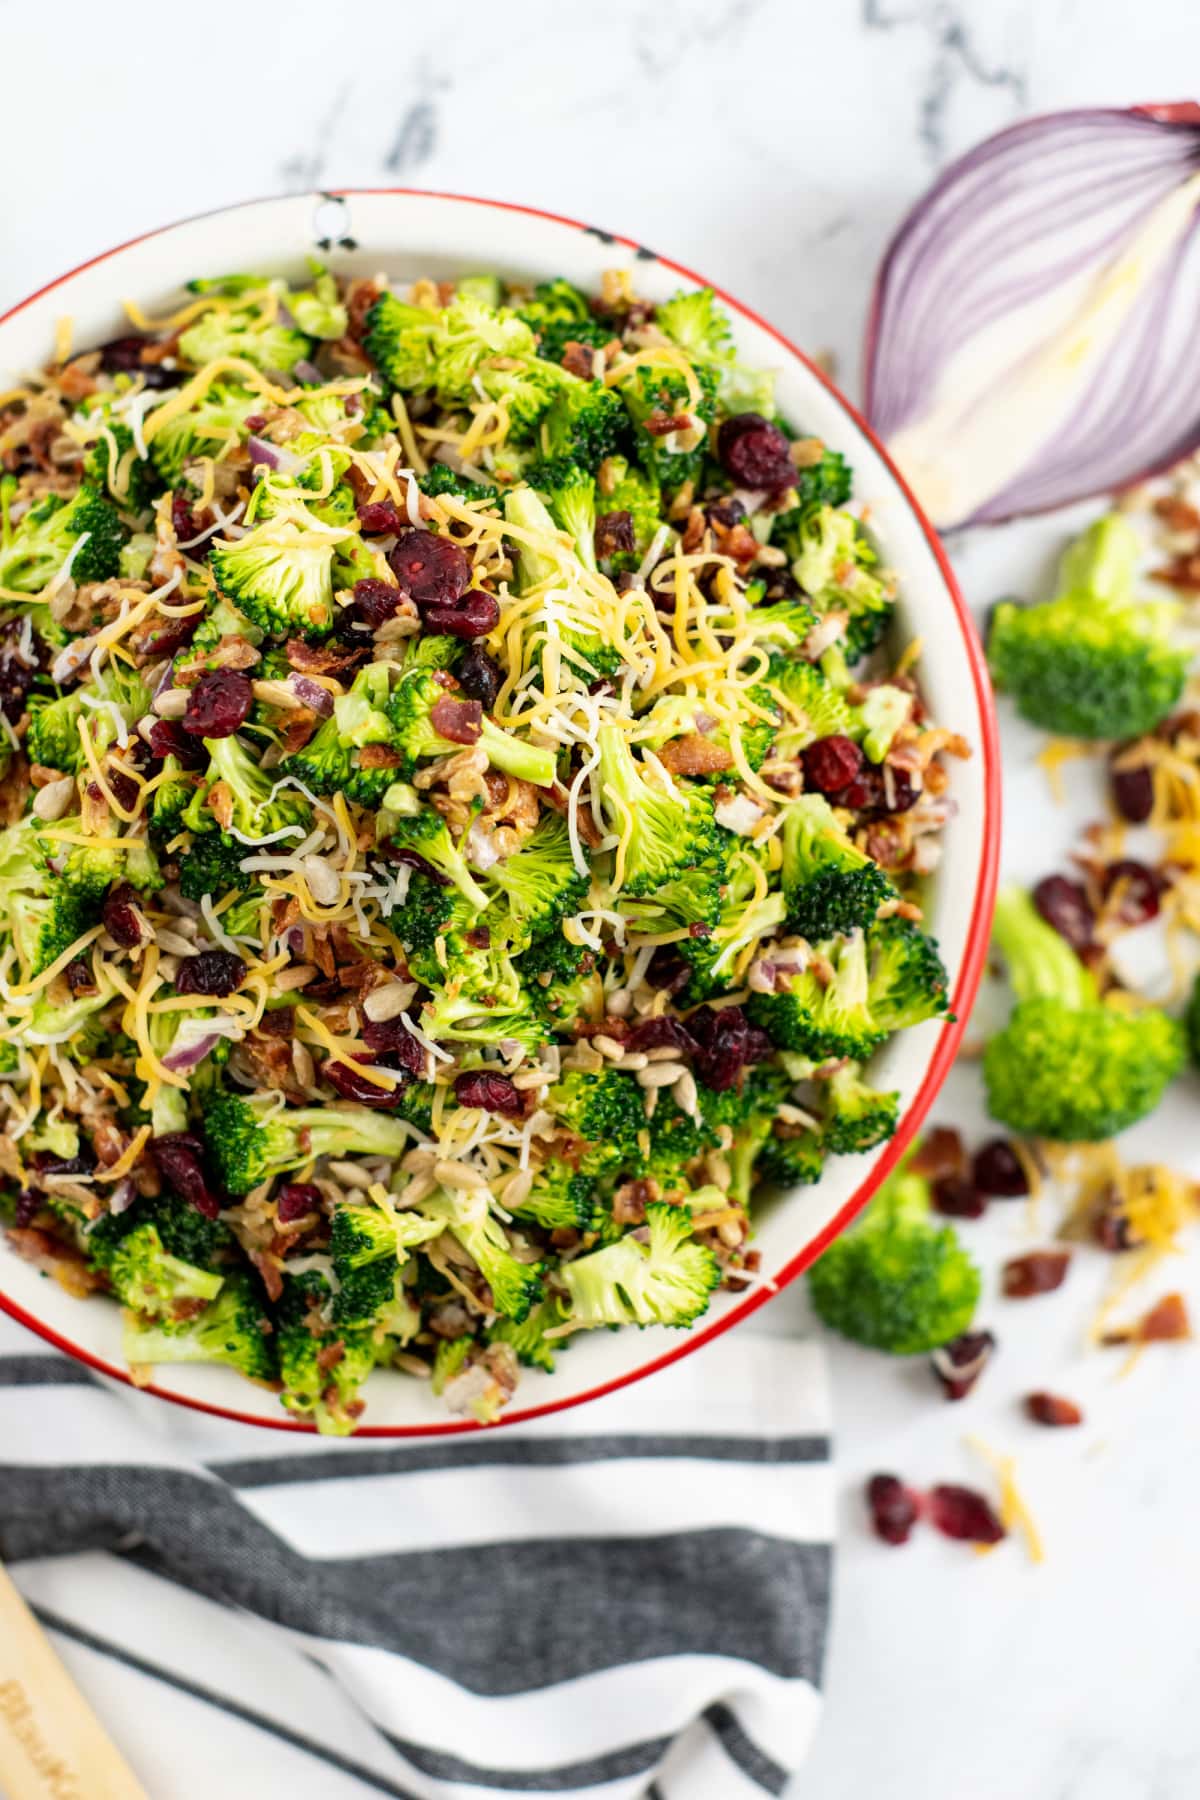 Large bowl filled with broccoli salad with craisins